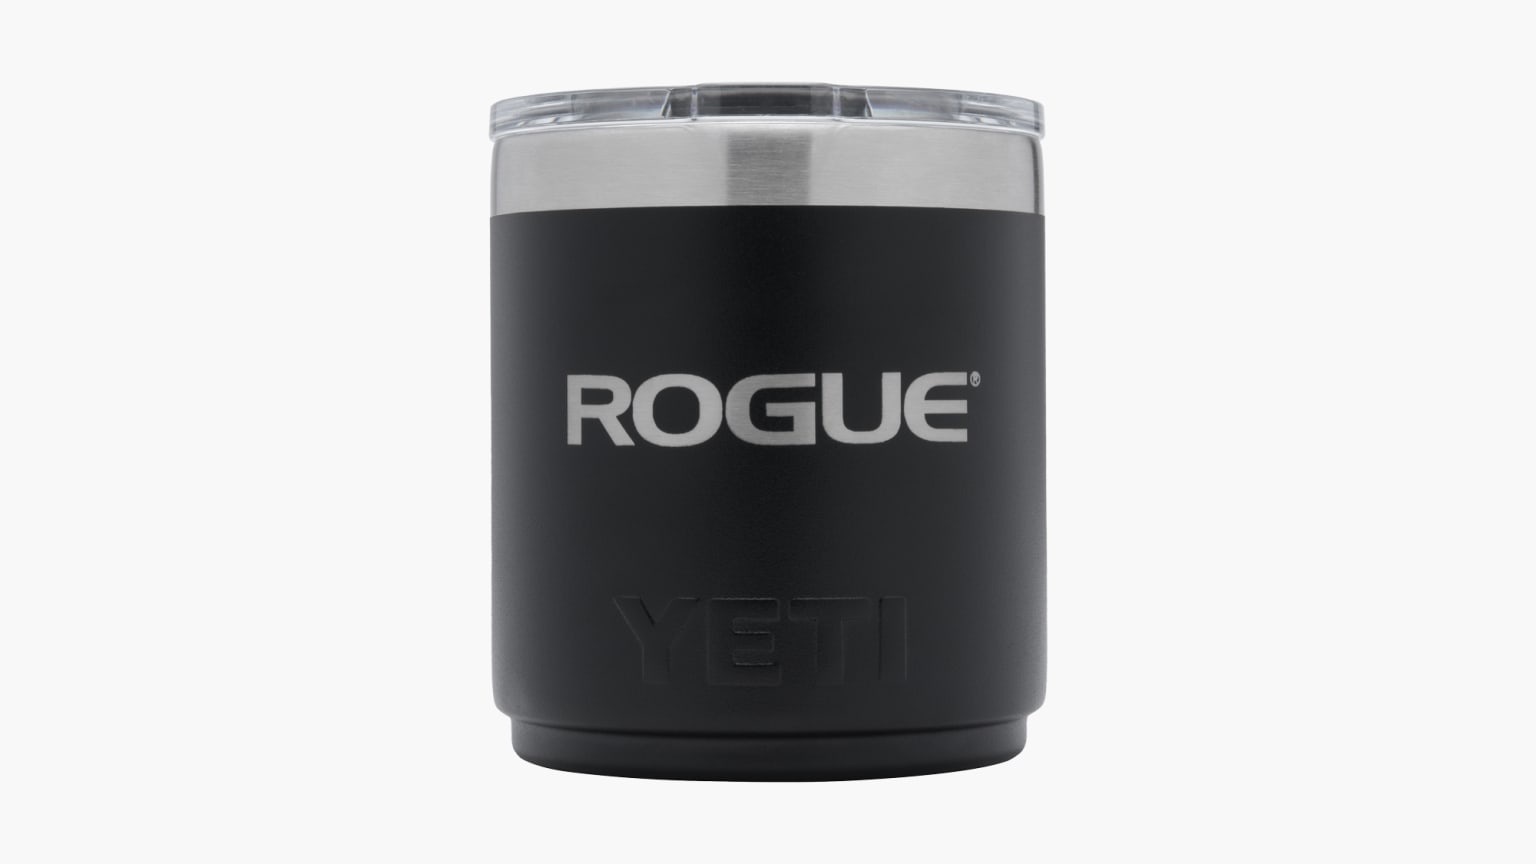 https://assets.roguefitness.com/f_auto,q_auto,c_limit,w_1536,b_rgb:f8f8f8/catalog/Gear%20and%20Accessories/Accessories/Shakers%20and%20Bottles/YT0107/YT0107-H_zjfzkp.png